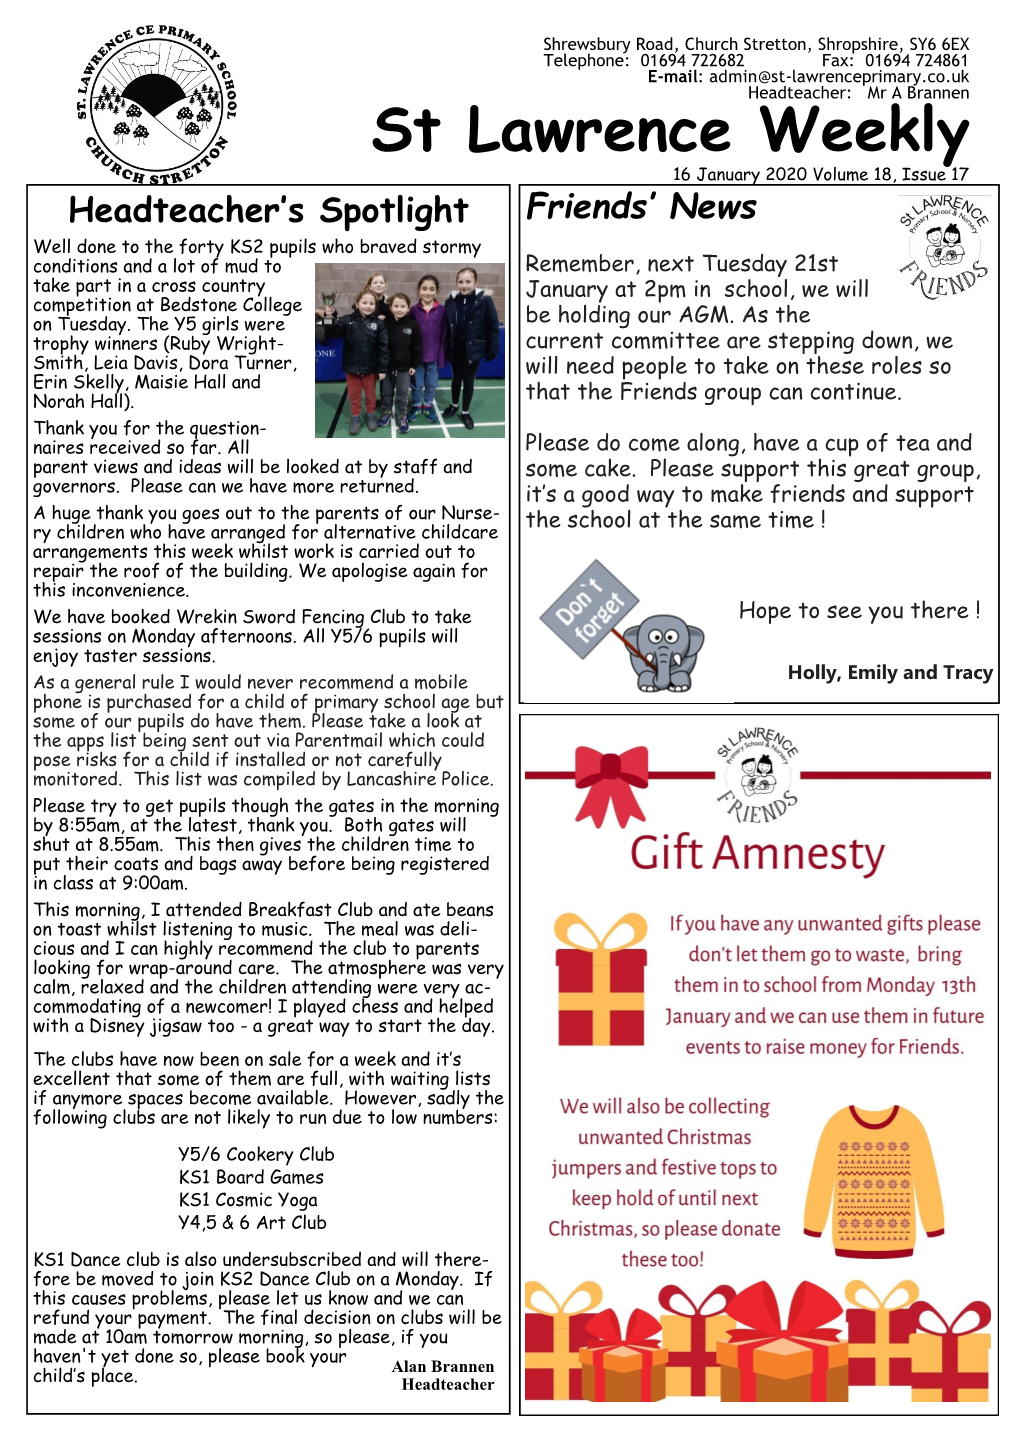 St Lawrence Weekly 16 January 2020 Volume 18, Issue 17